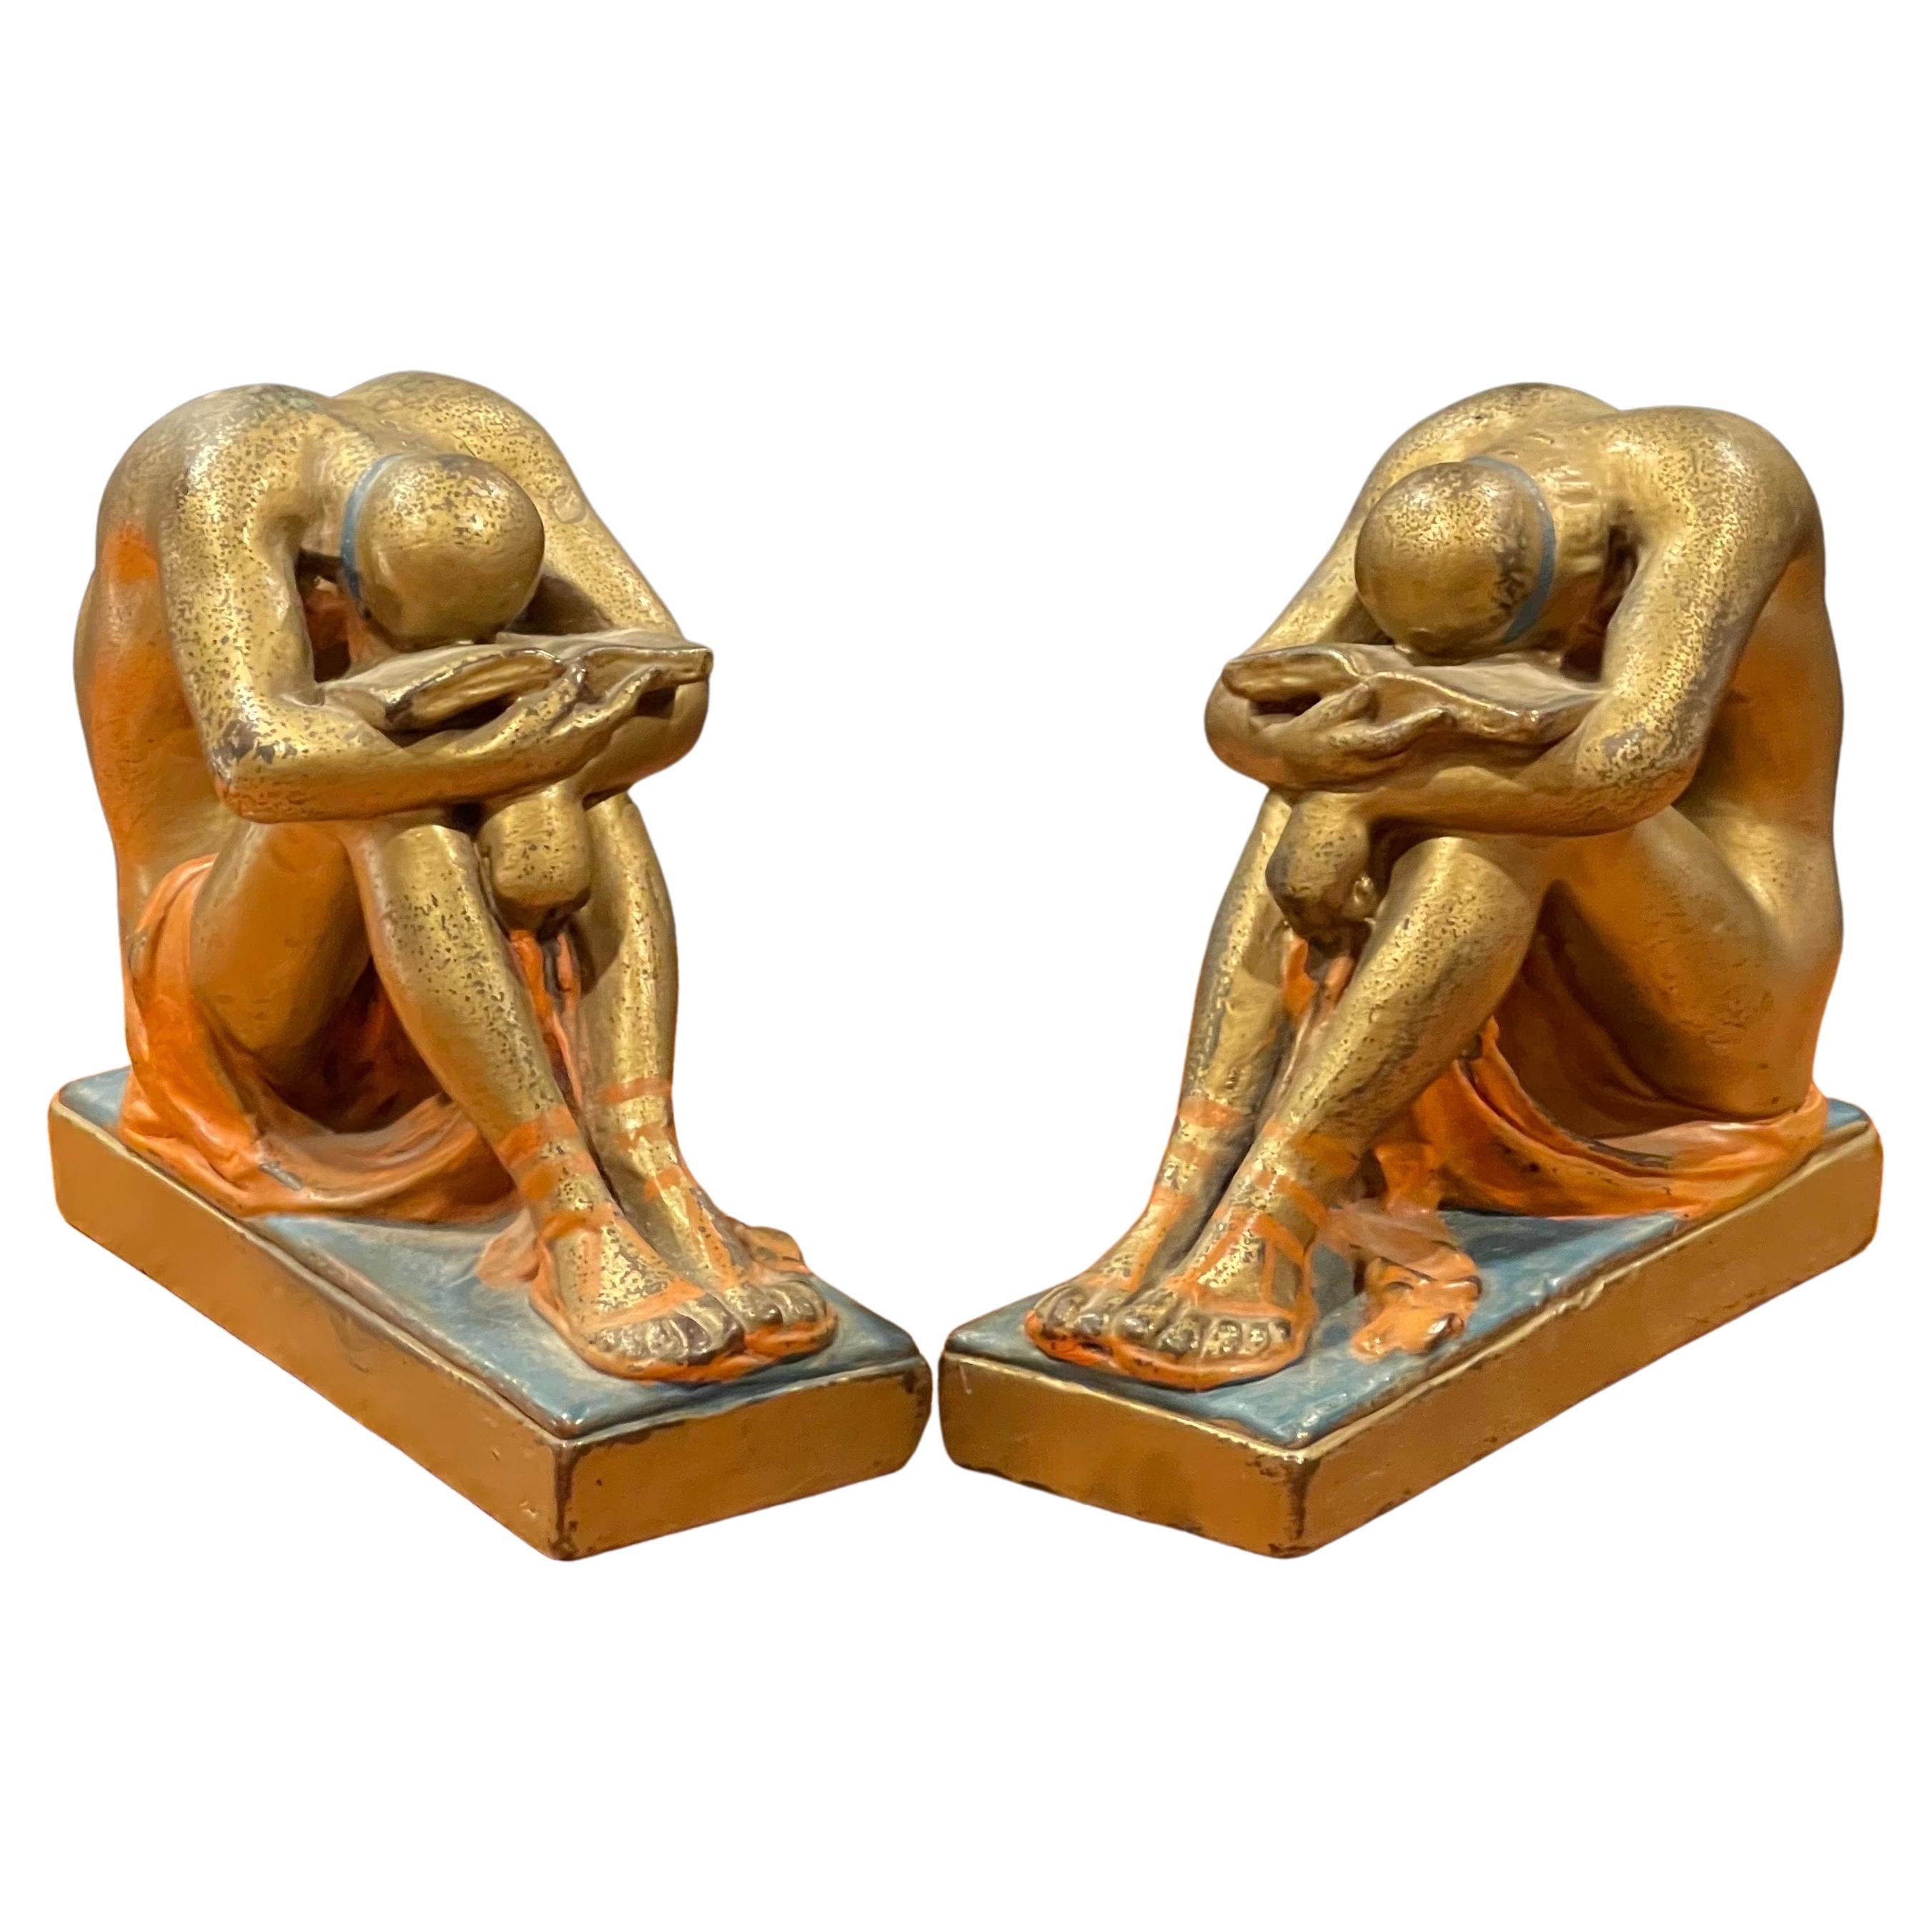 Antique pair of solitude / scholar bookends in polychrome bronze finish, circa 1940s. The pair have a great look, are quite solid and measure 11.25